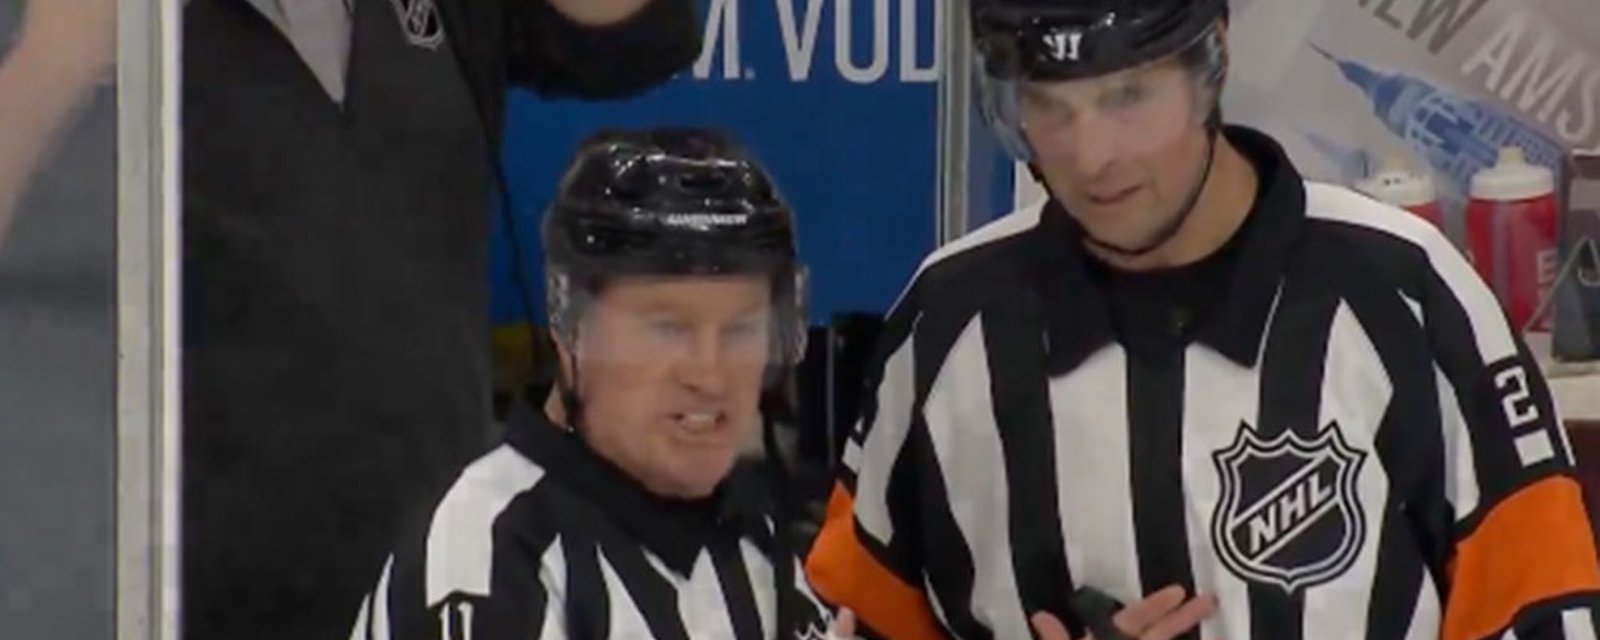 Controversy early in Flyers and Capitals game this evening